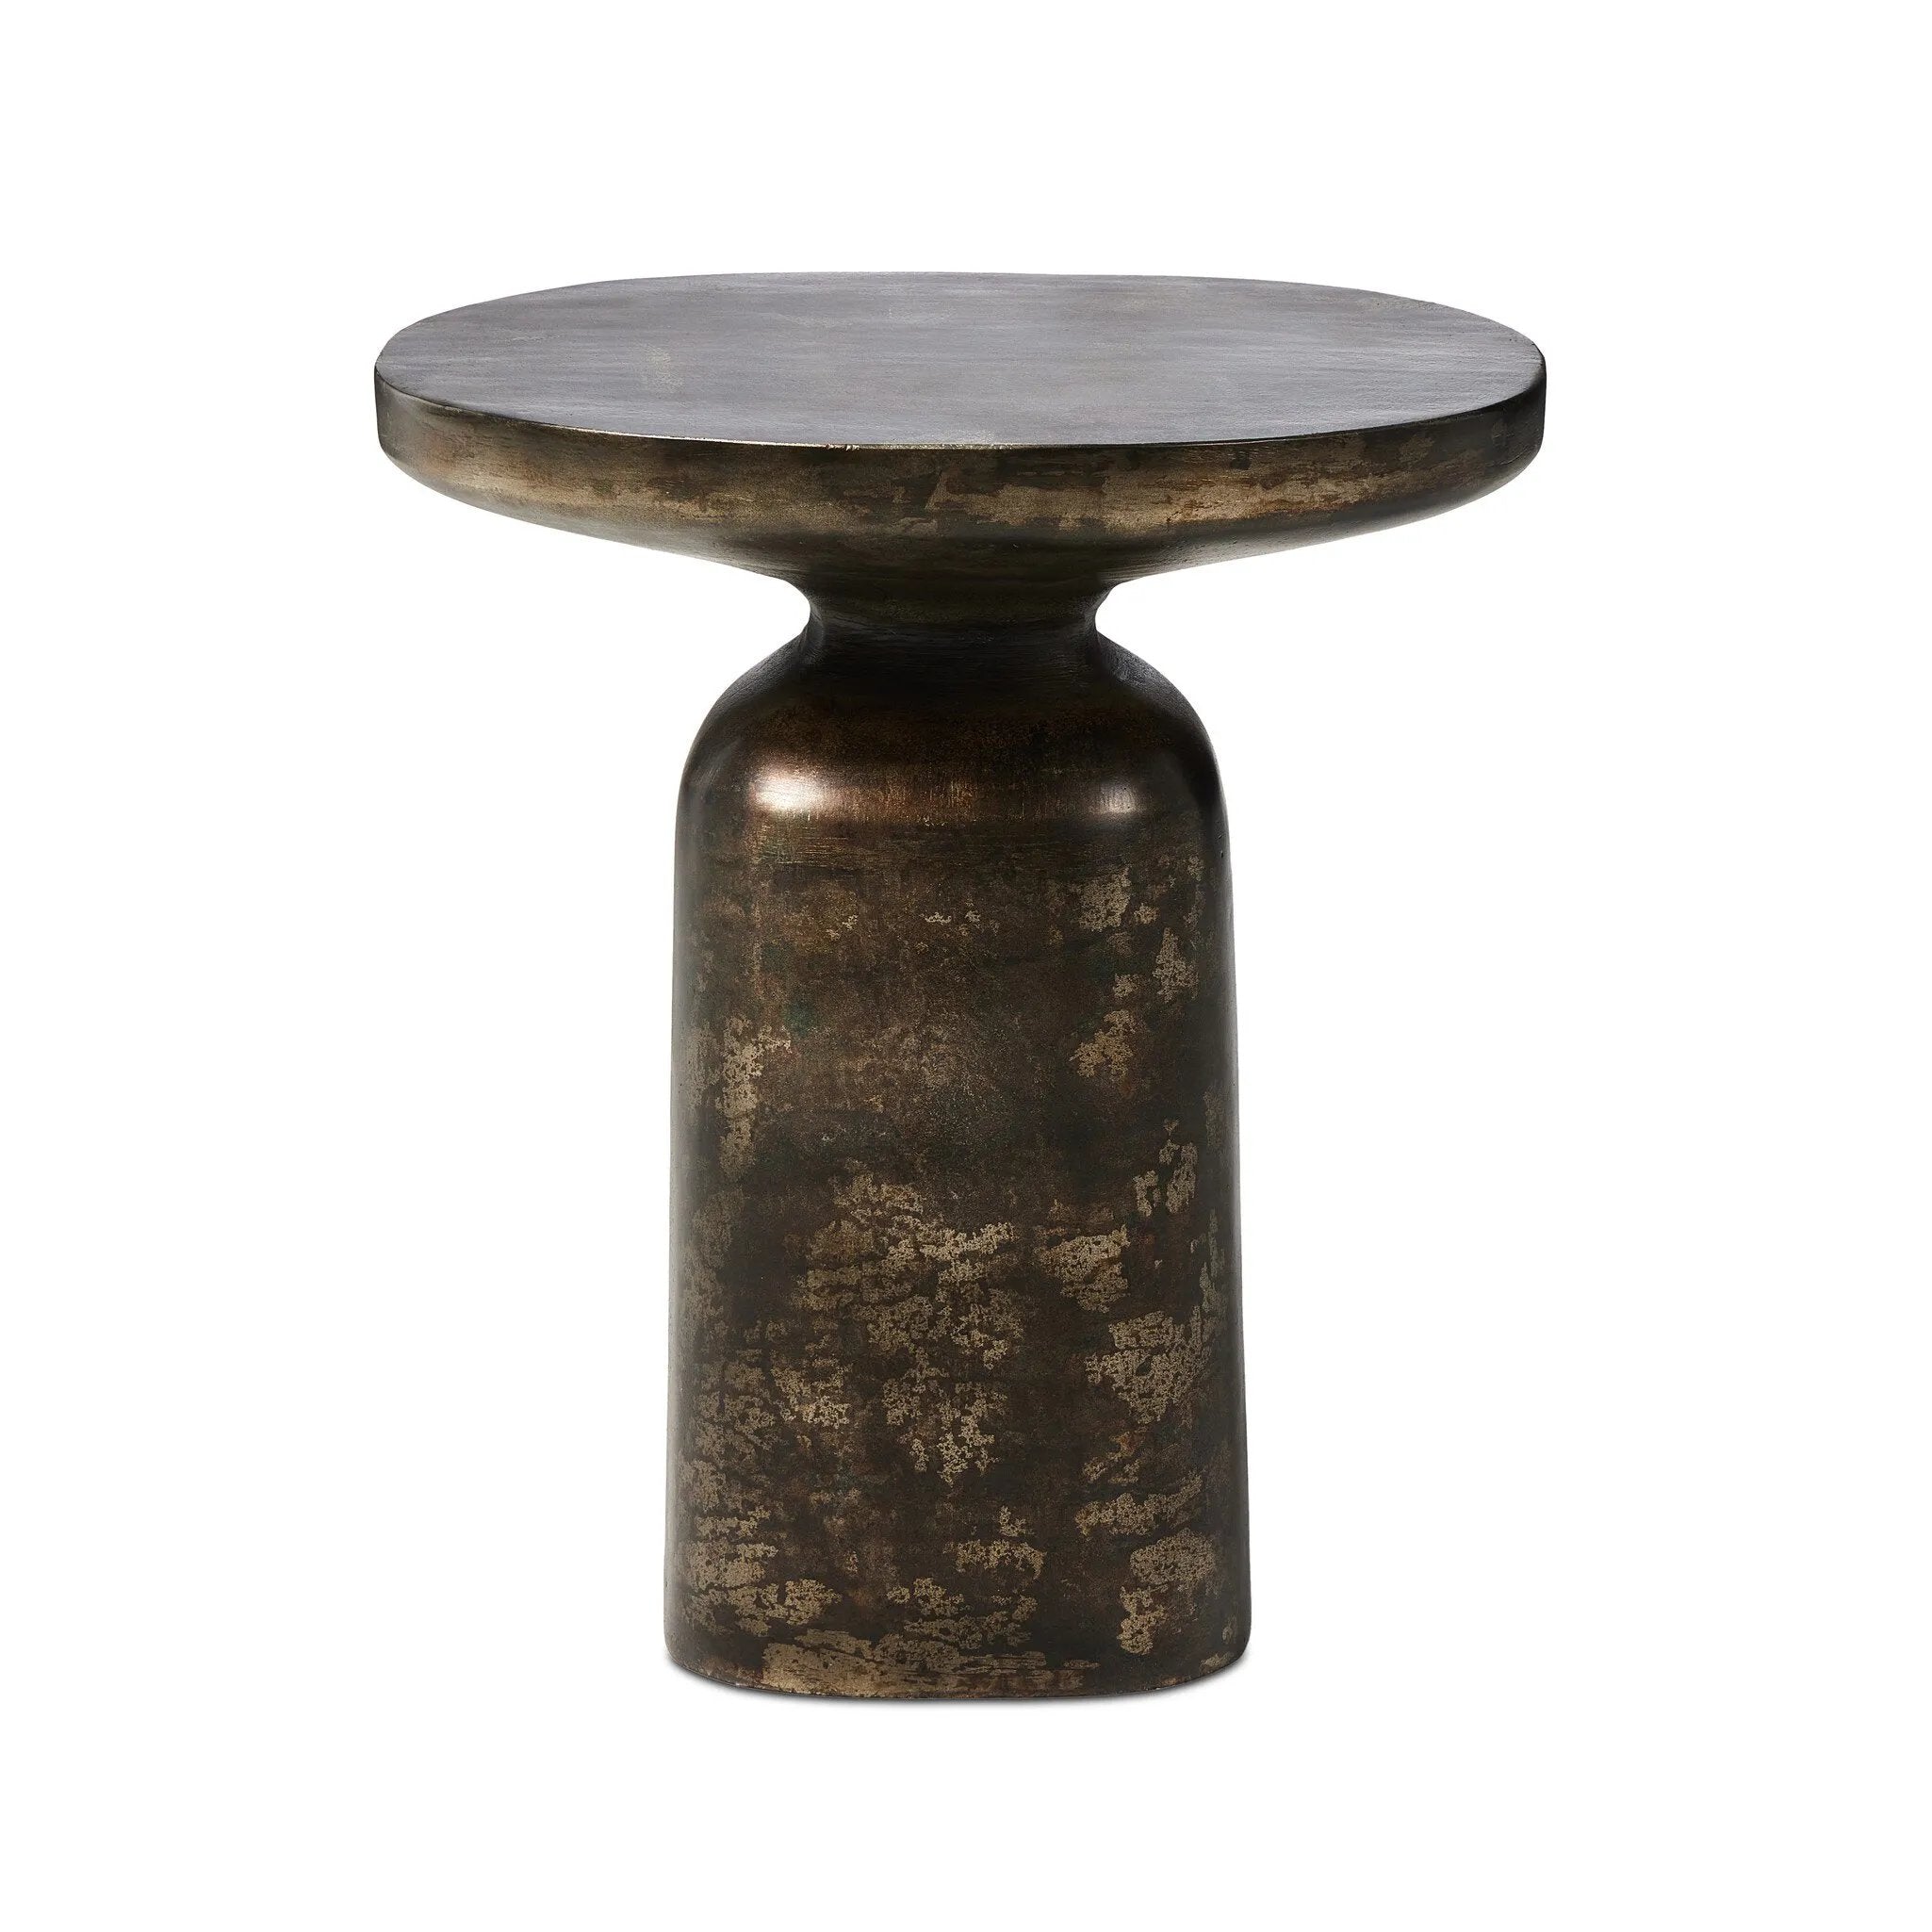 Forged from cast iron with a distressed bronze patina finish. A sturdy pedestal base and rounded square top create a functional, industrial-inspired piece.Collection: Marlo Amethyst Home provides interior design, new home construction design consulting, vintage area rugs, and lighting in the Winter Garden metro area.